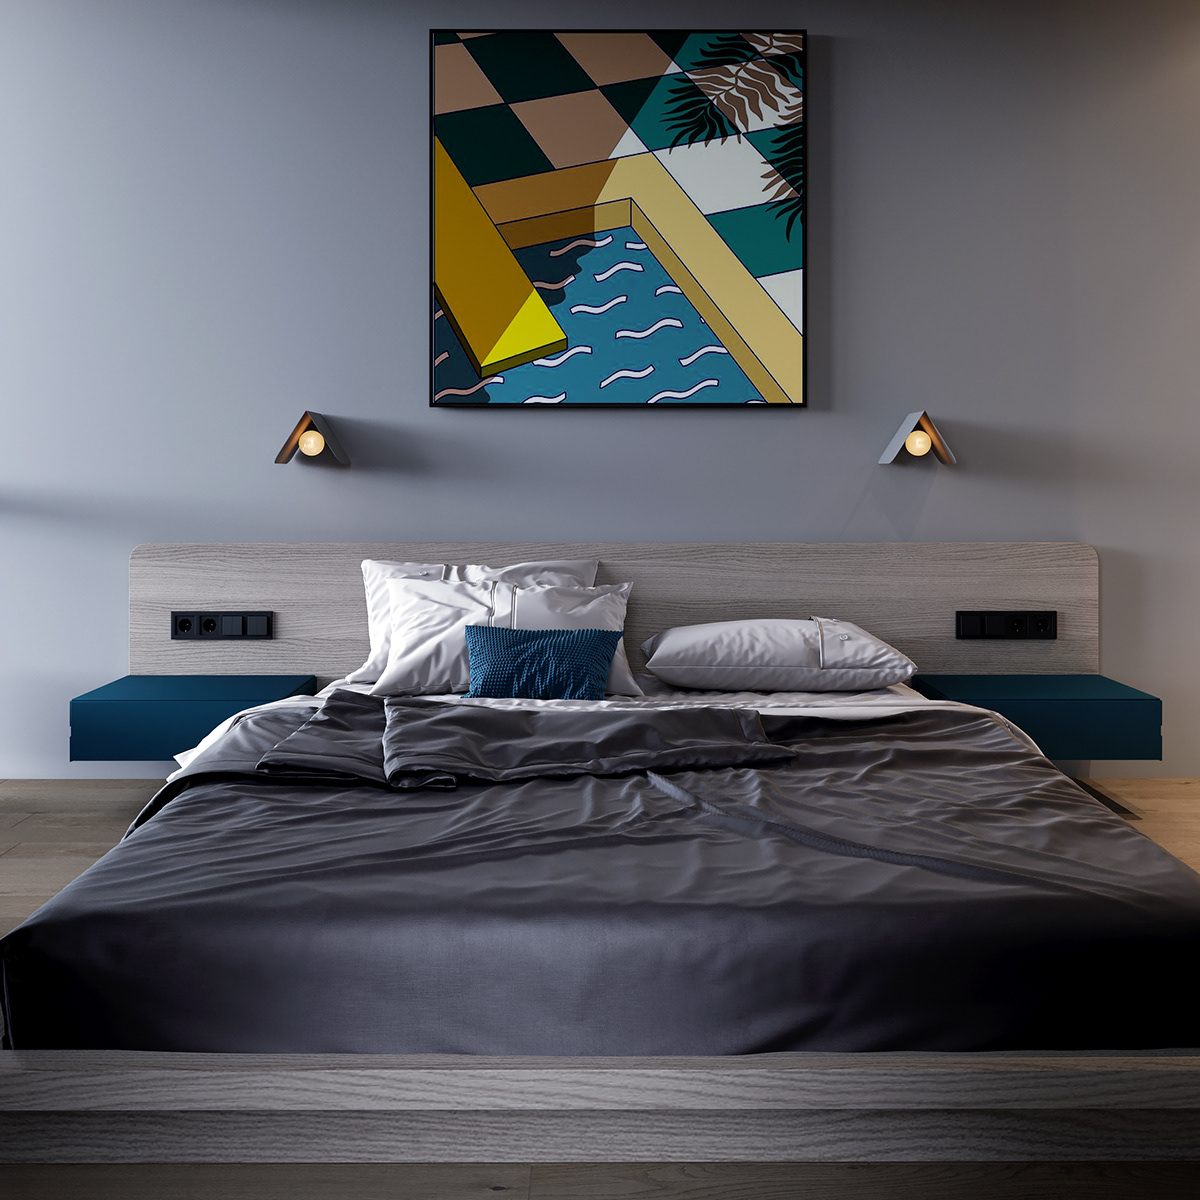 Oil painting with bright colors hanging on the head of the bed brings a sense of joy and pleasure to help the mood to always be confident and satisfied.